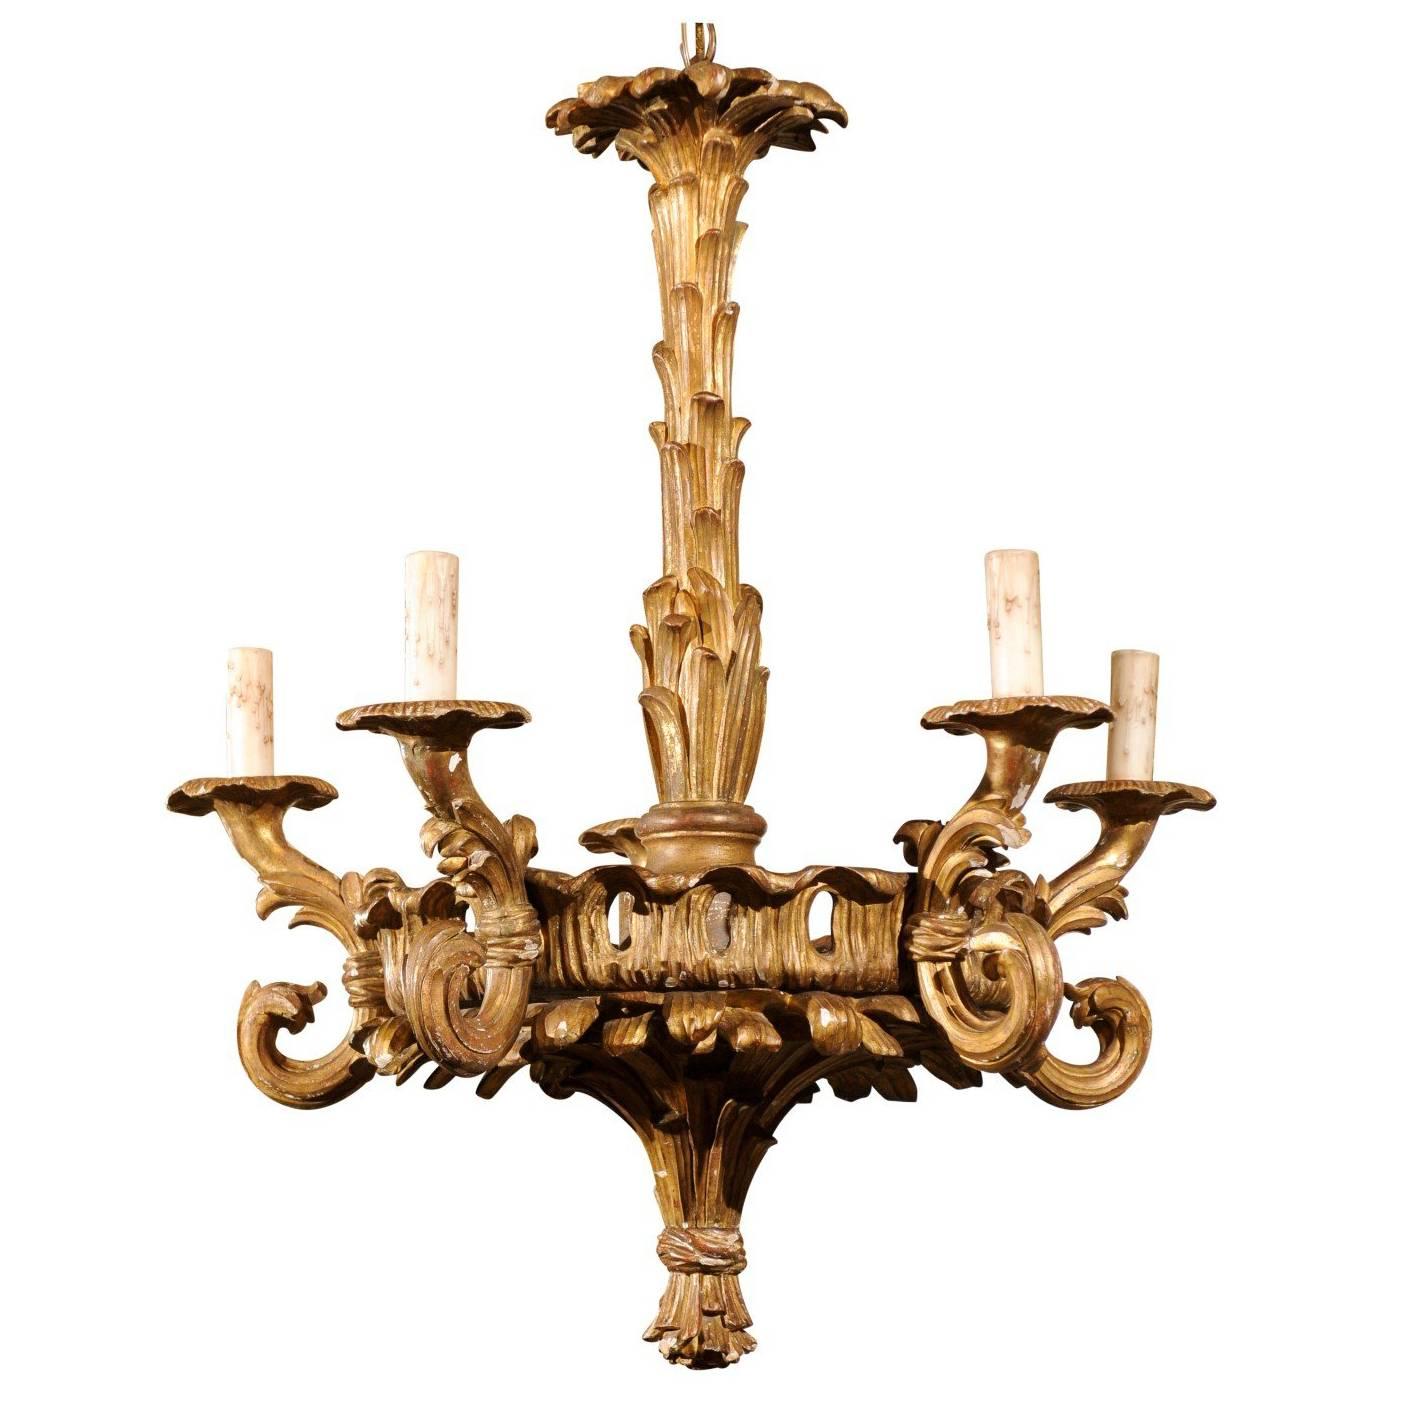 French Five-Light Foliage Themed Giltwood Carved Chandelier, Early 20th Century For Sale